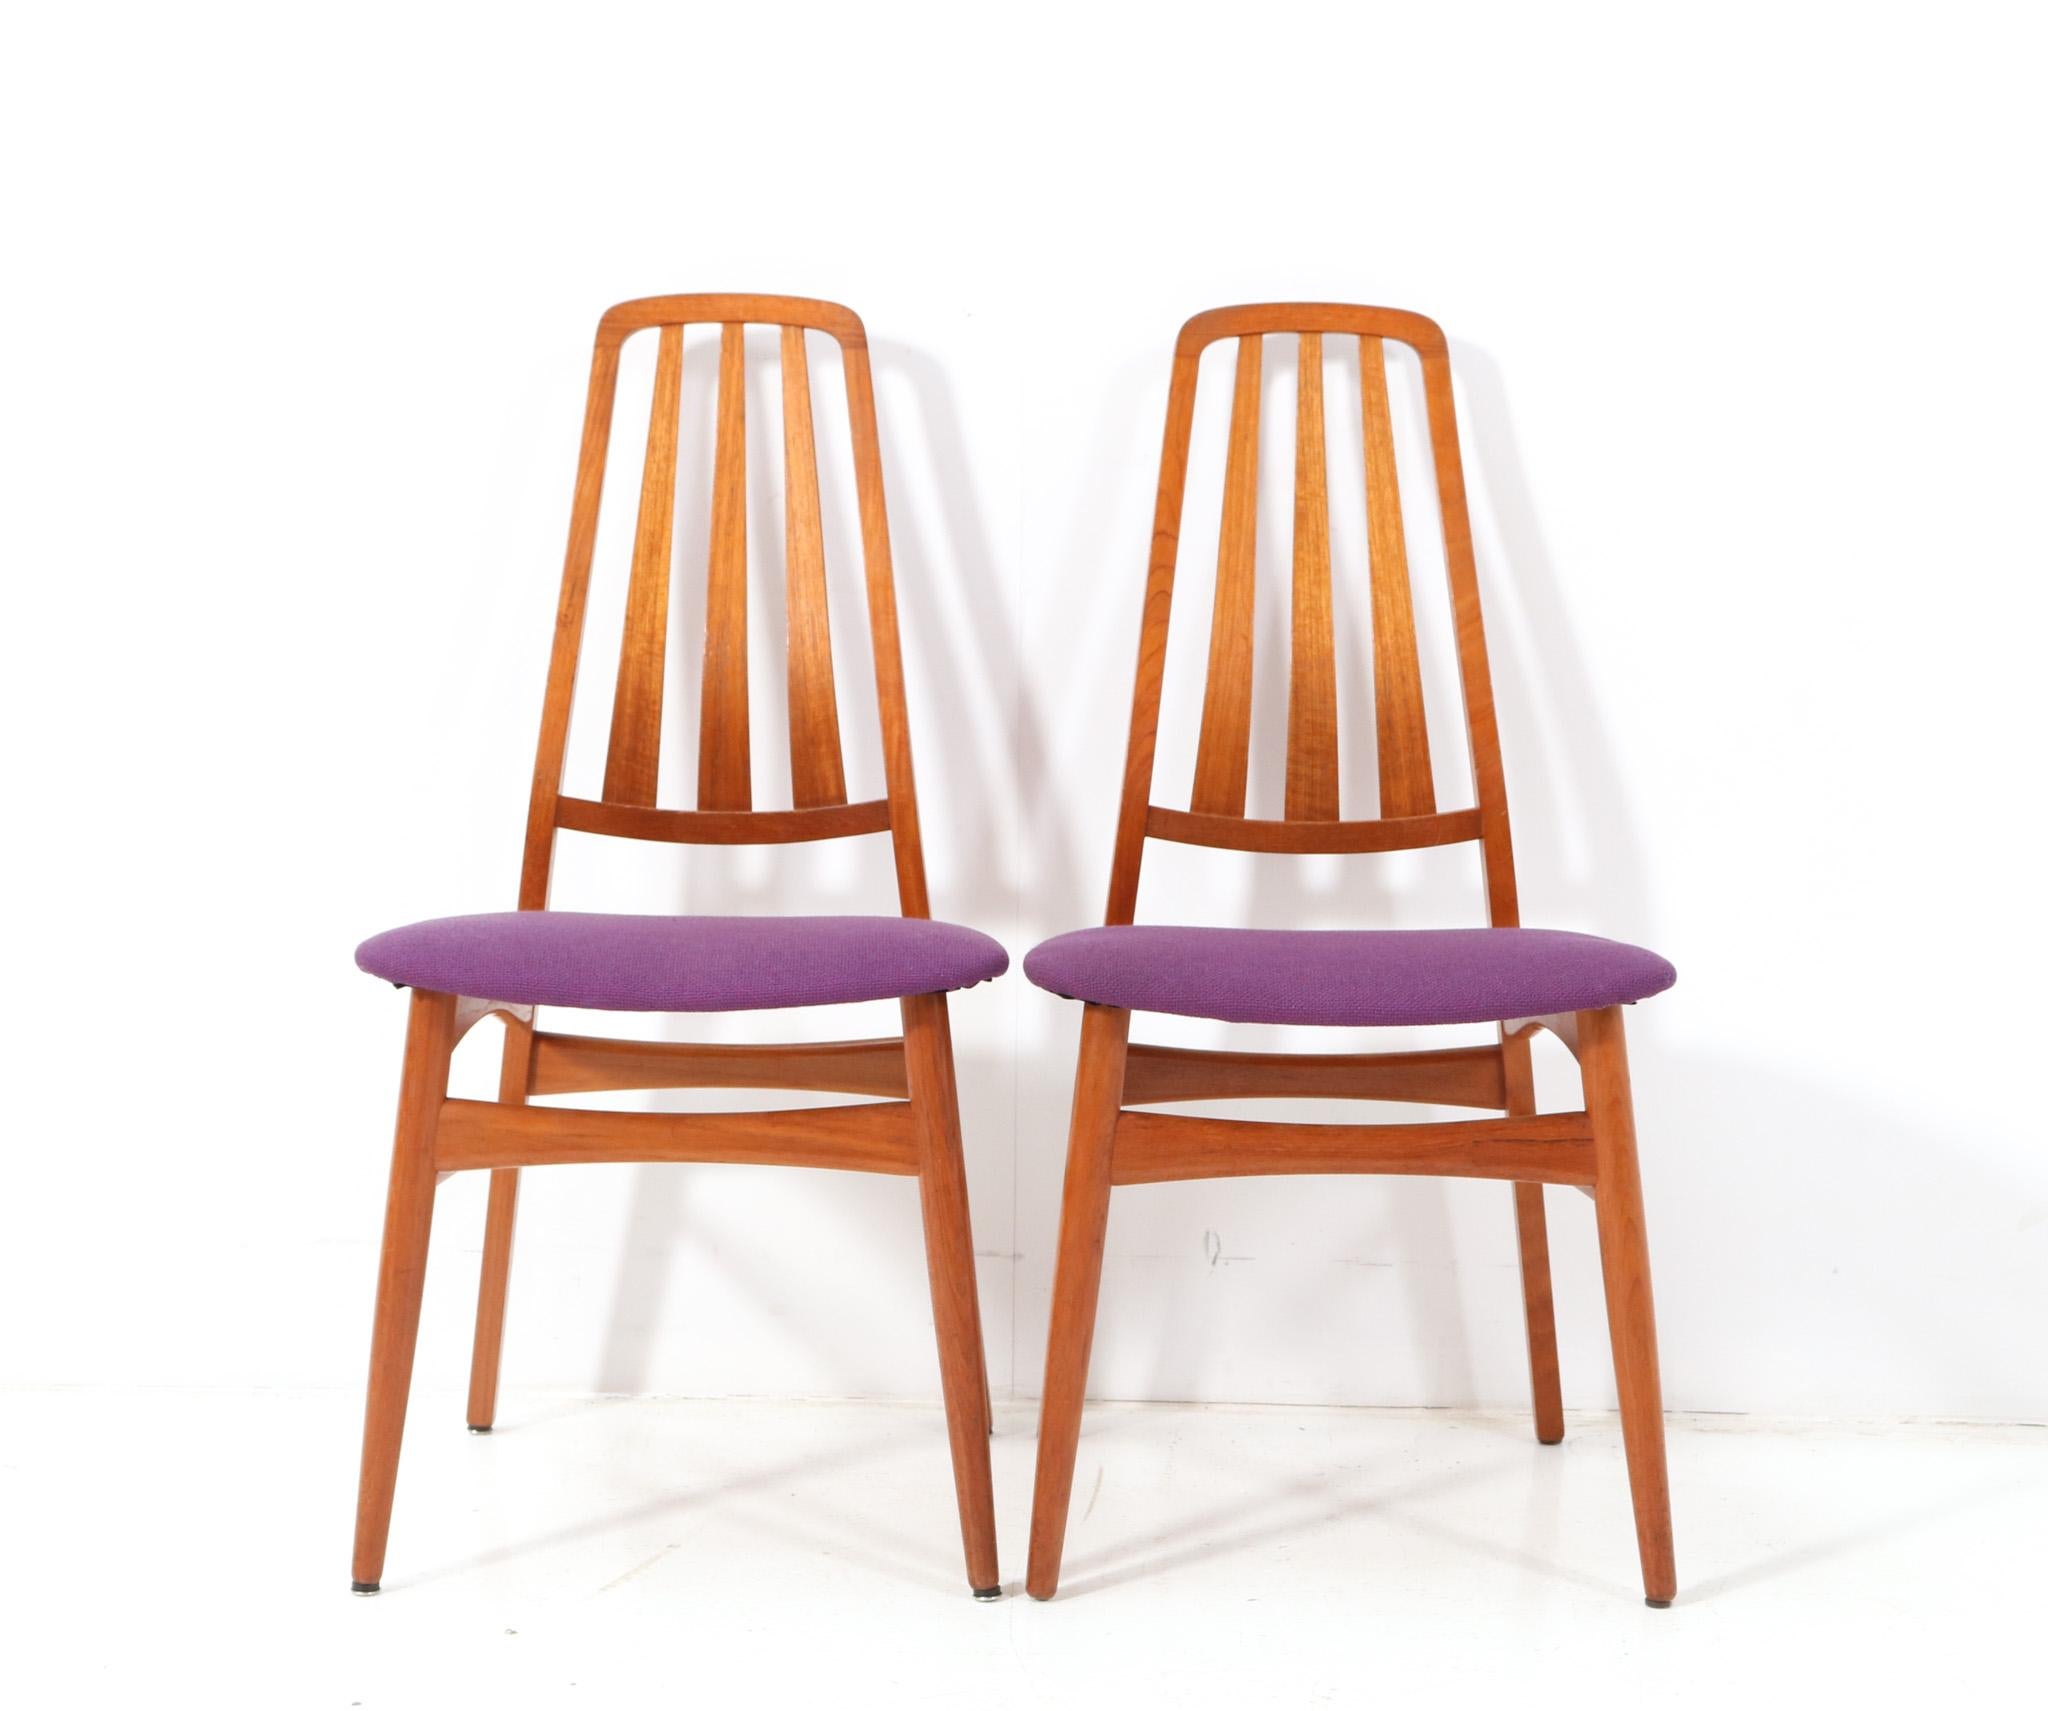 Mid-20th Century Six Teak Mid-Century Modern Dining Room Chairs, 1960s For Sale